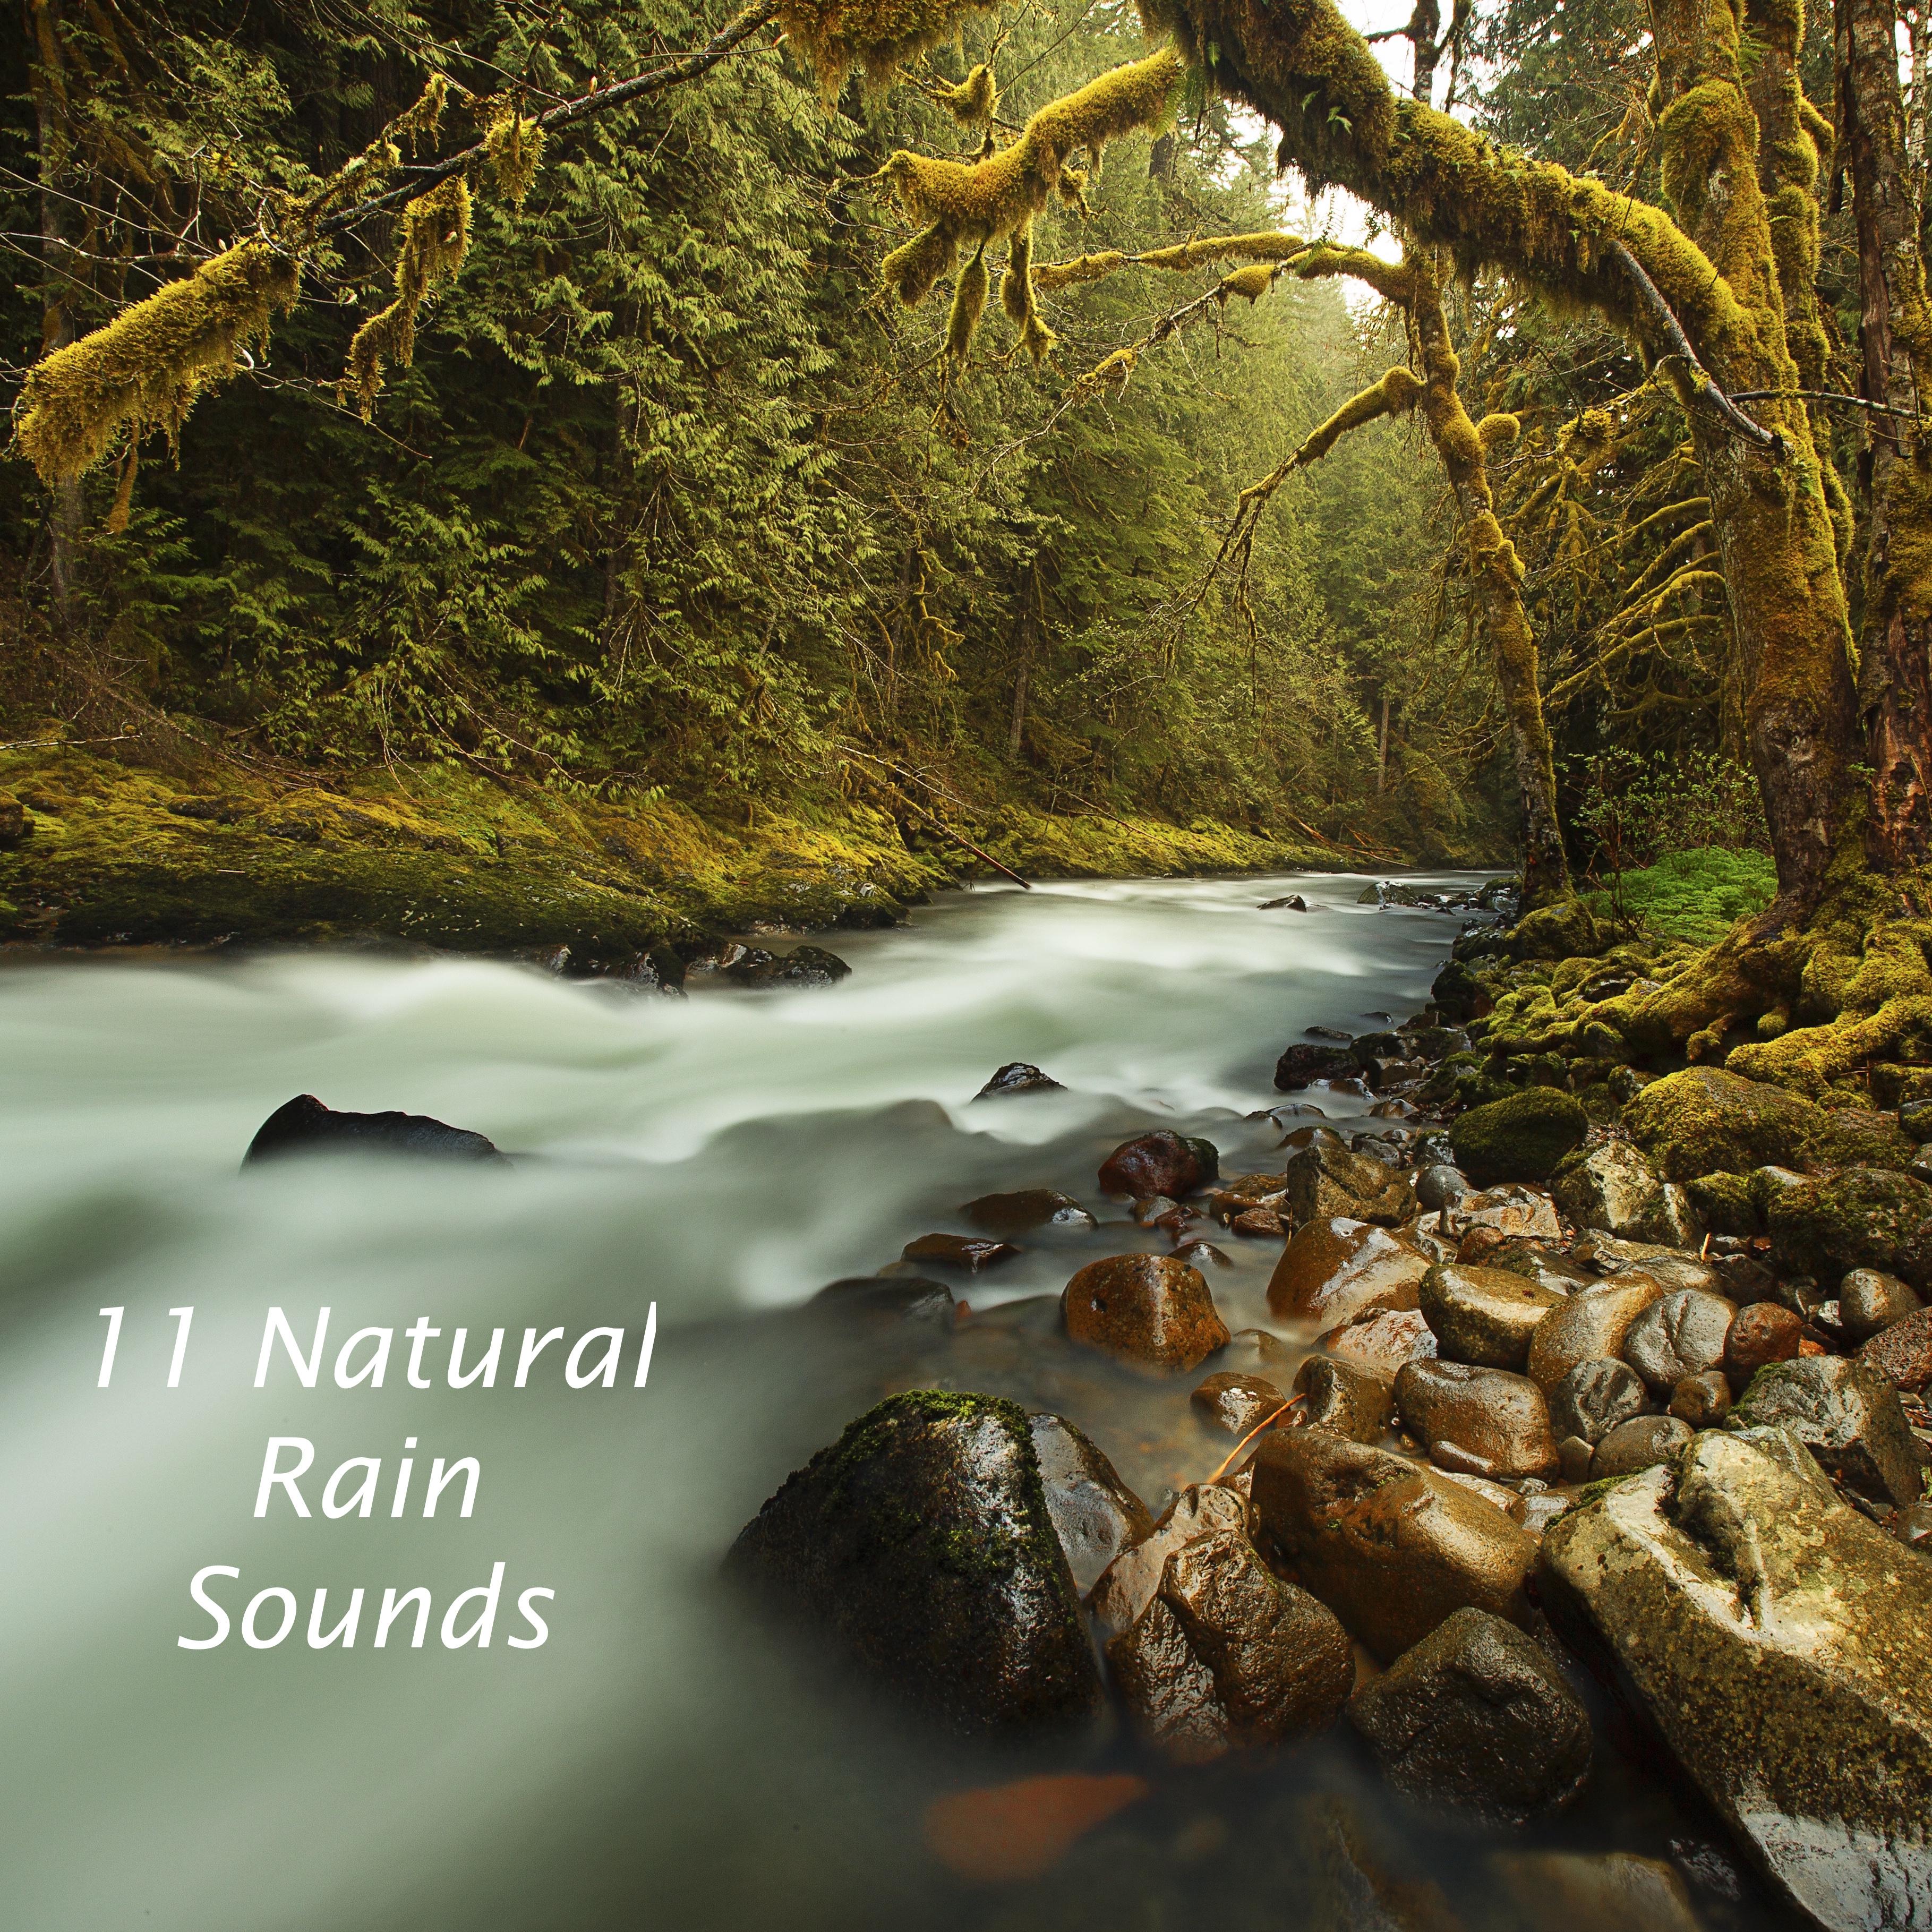 11 Natural Rain Sounds Designed for Deep Sleep and Wellbeing